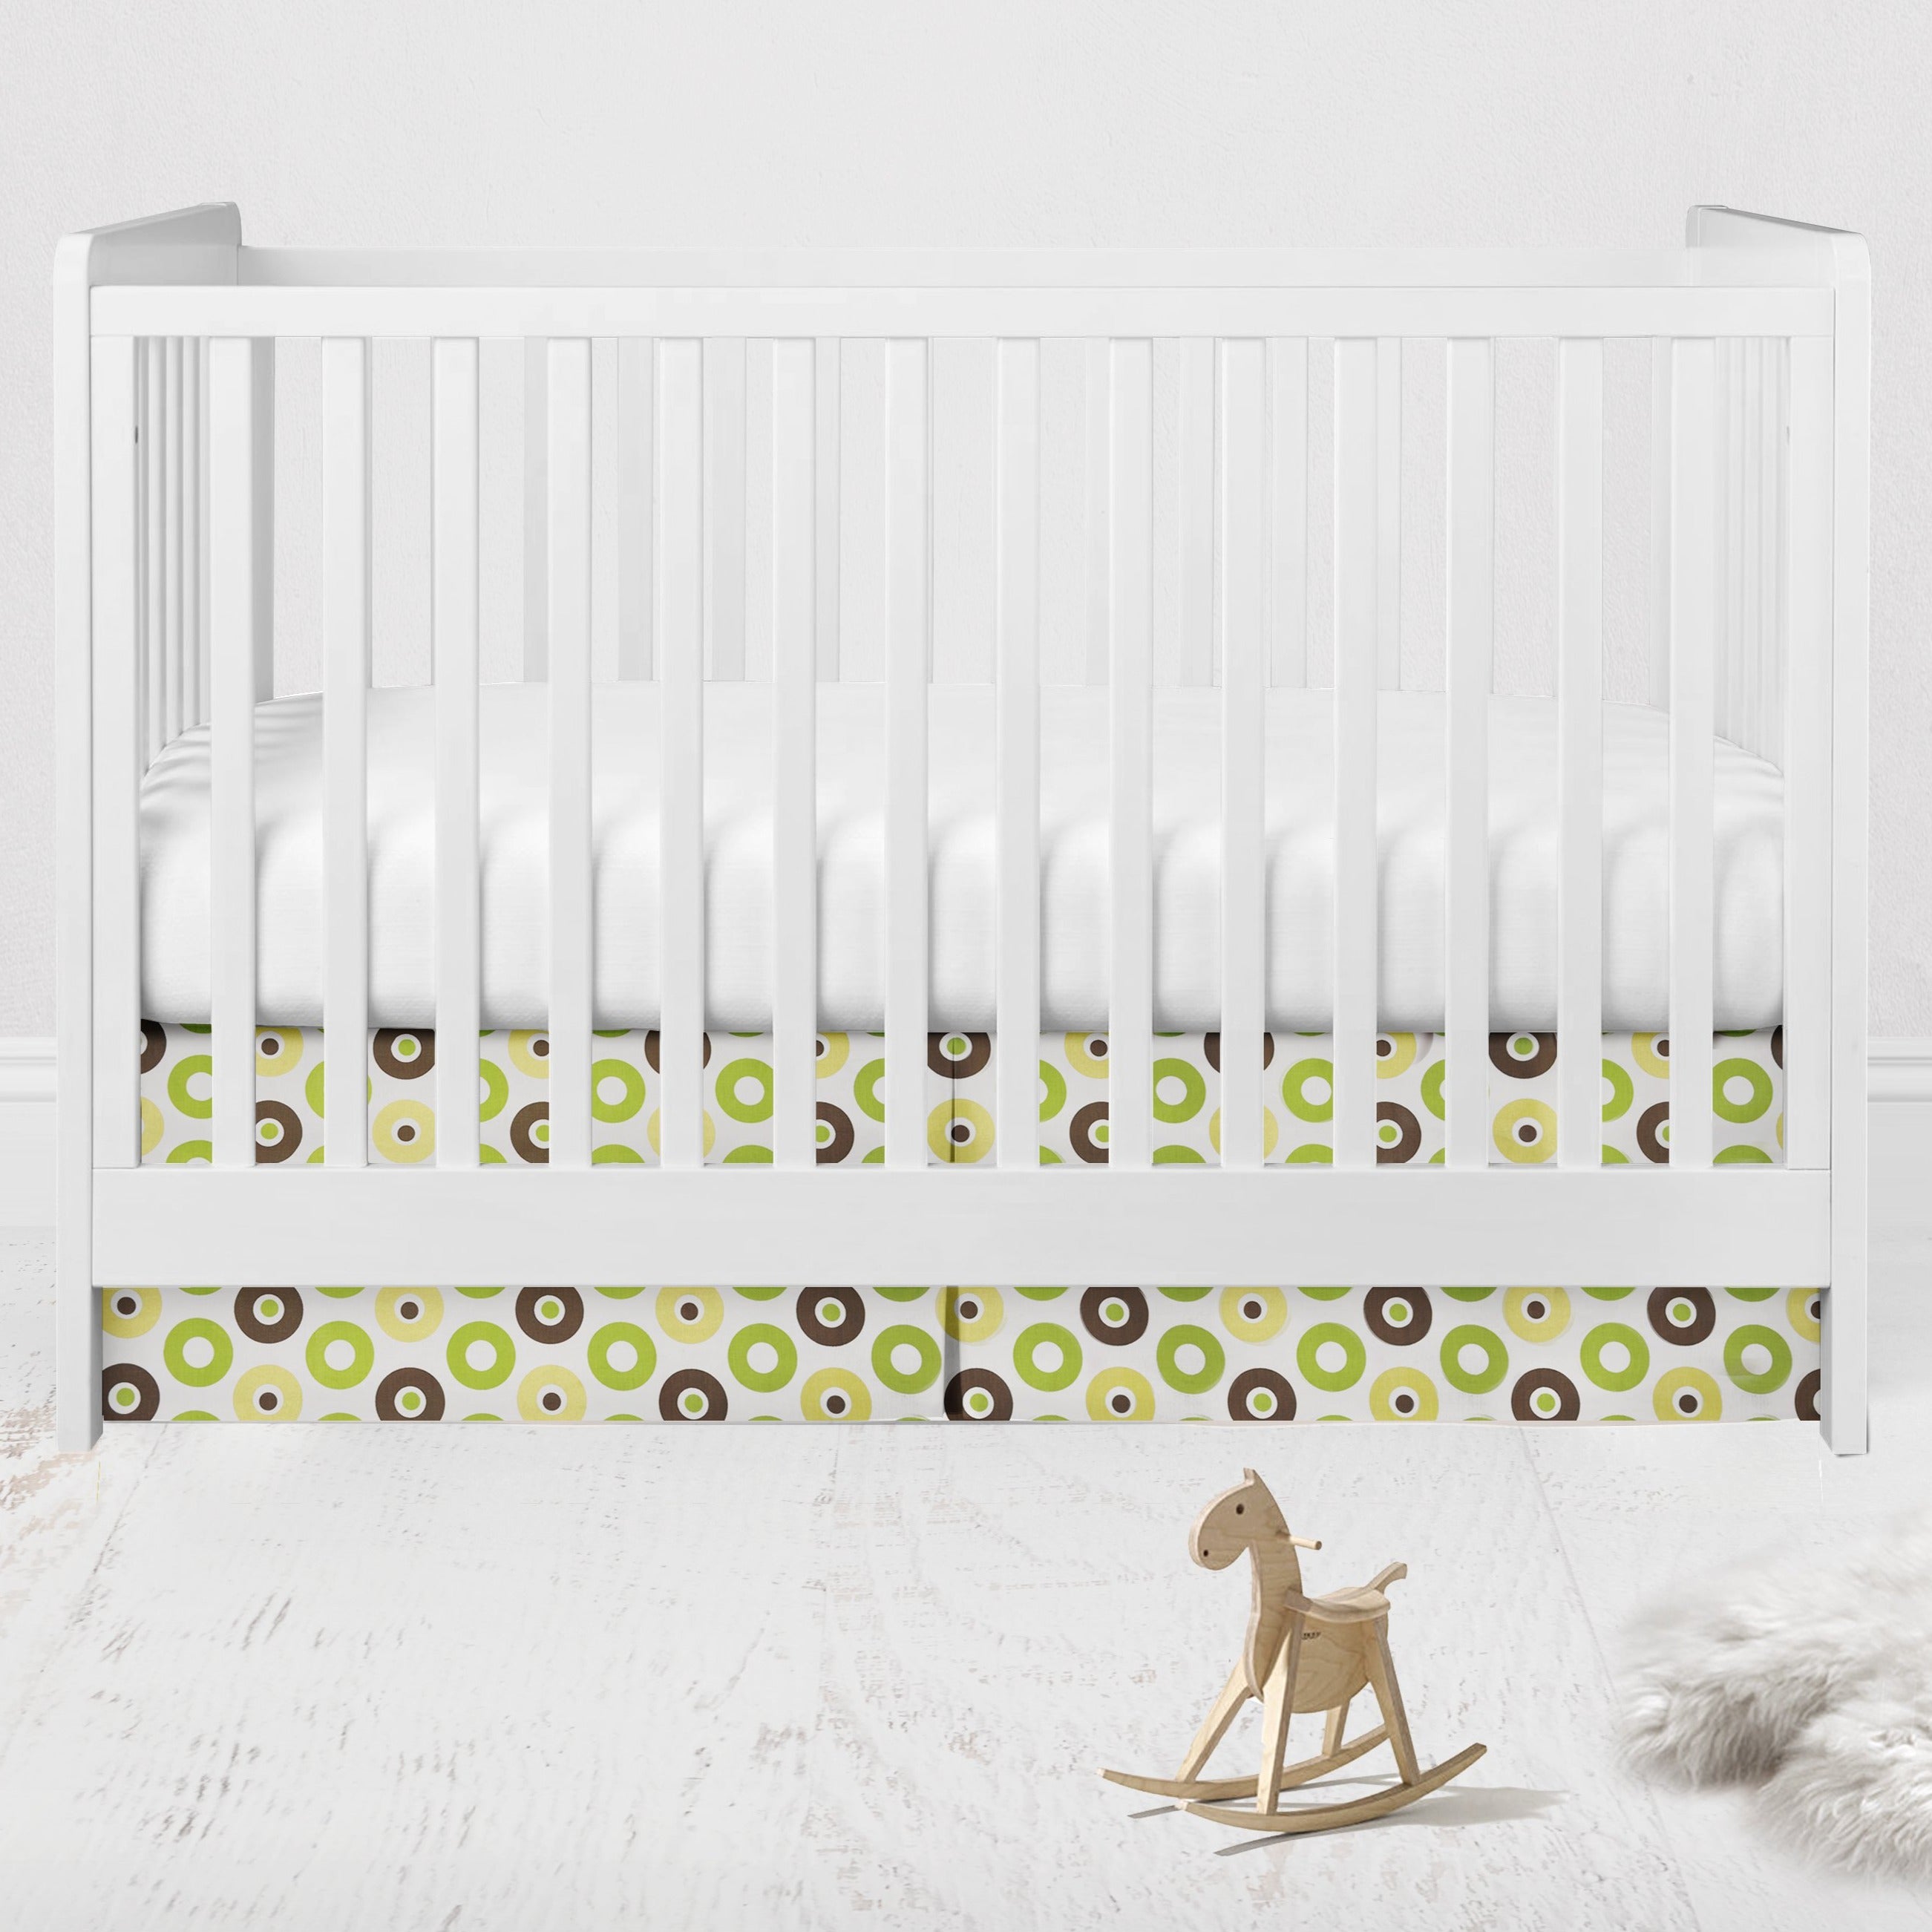 Bacati - Multiple Options of Crib or Toddler Bed Skirt or Dust Ruffle 100% Cotton Percale, Mod Dots/Stripes, Green/Yellow/Beige/Brown